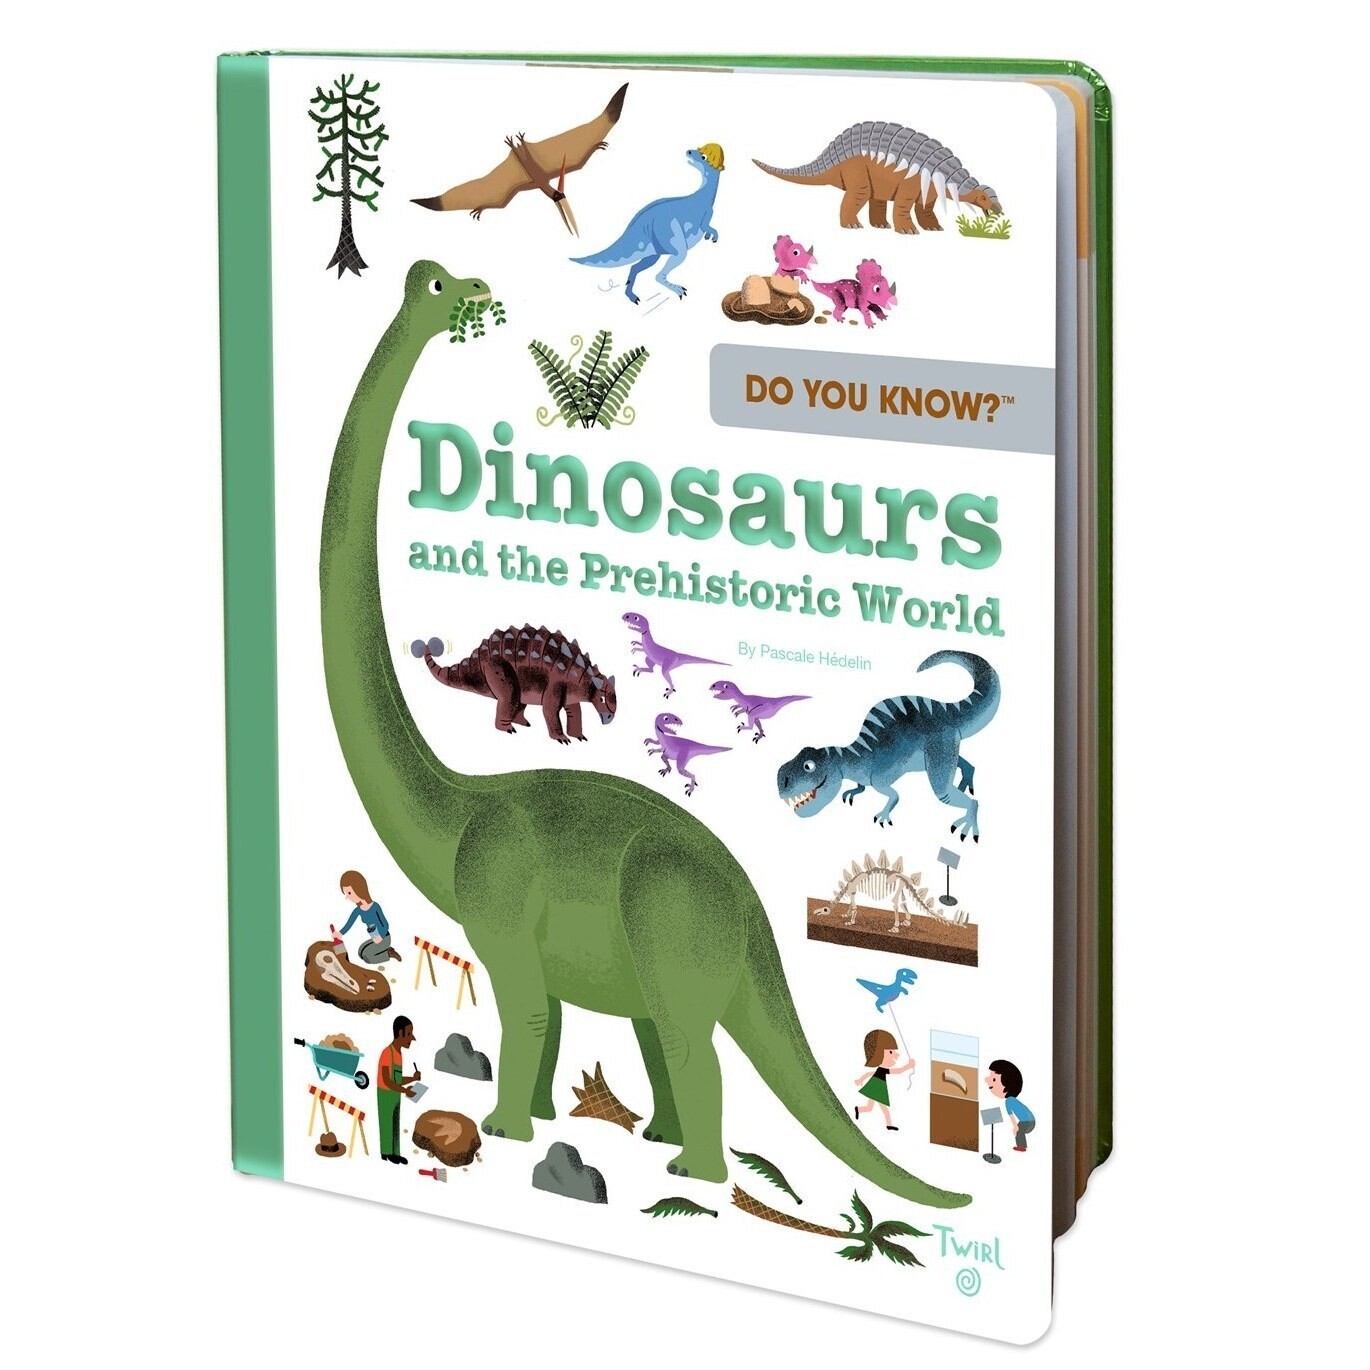 Do You Know? Dinosaurs and the Prehistoric World